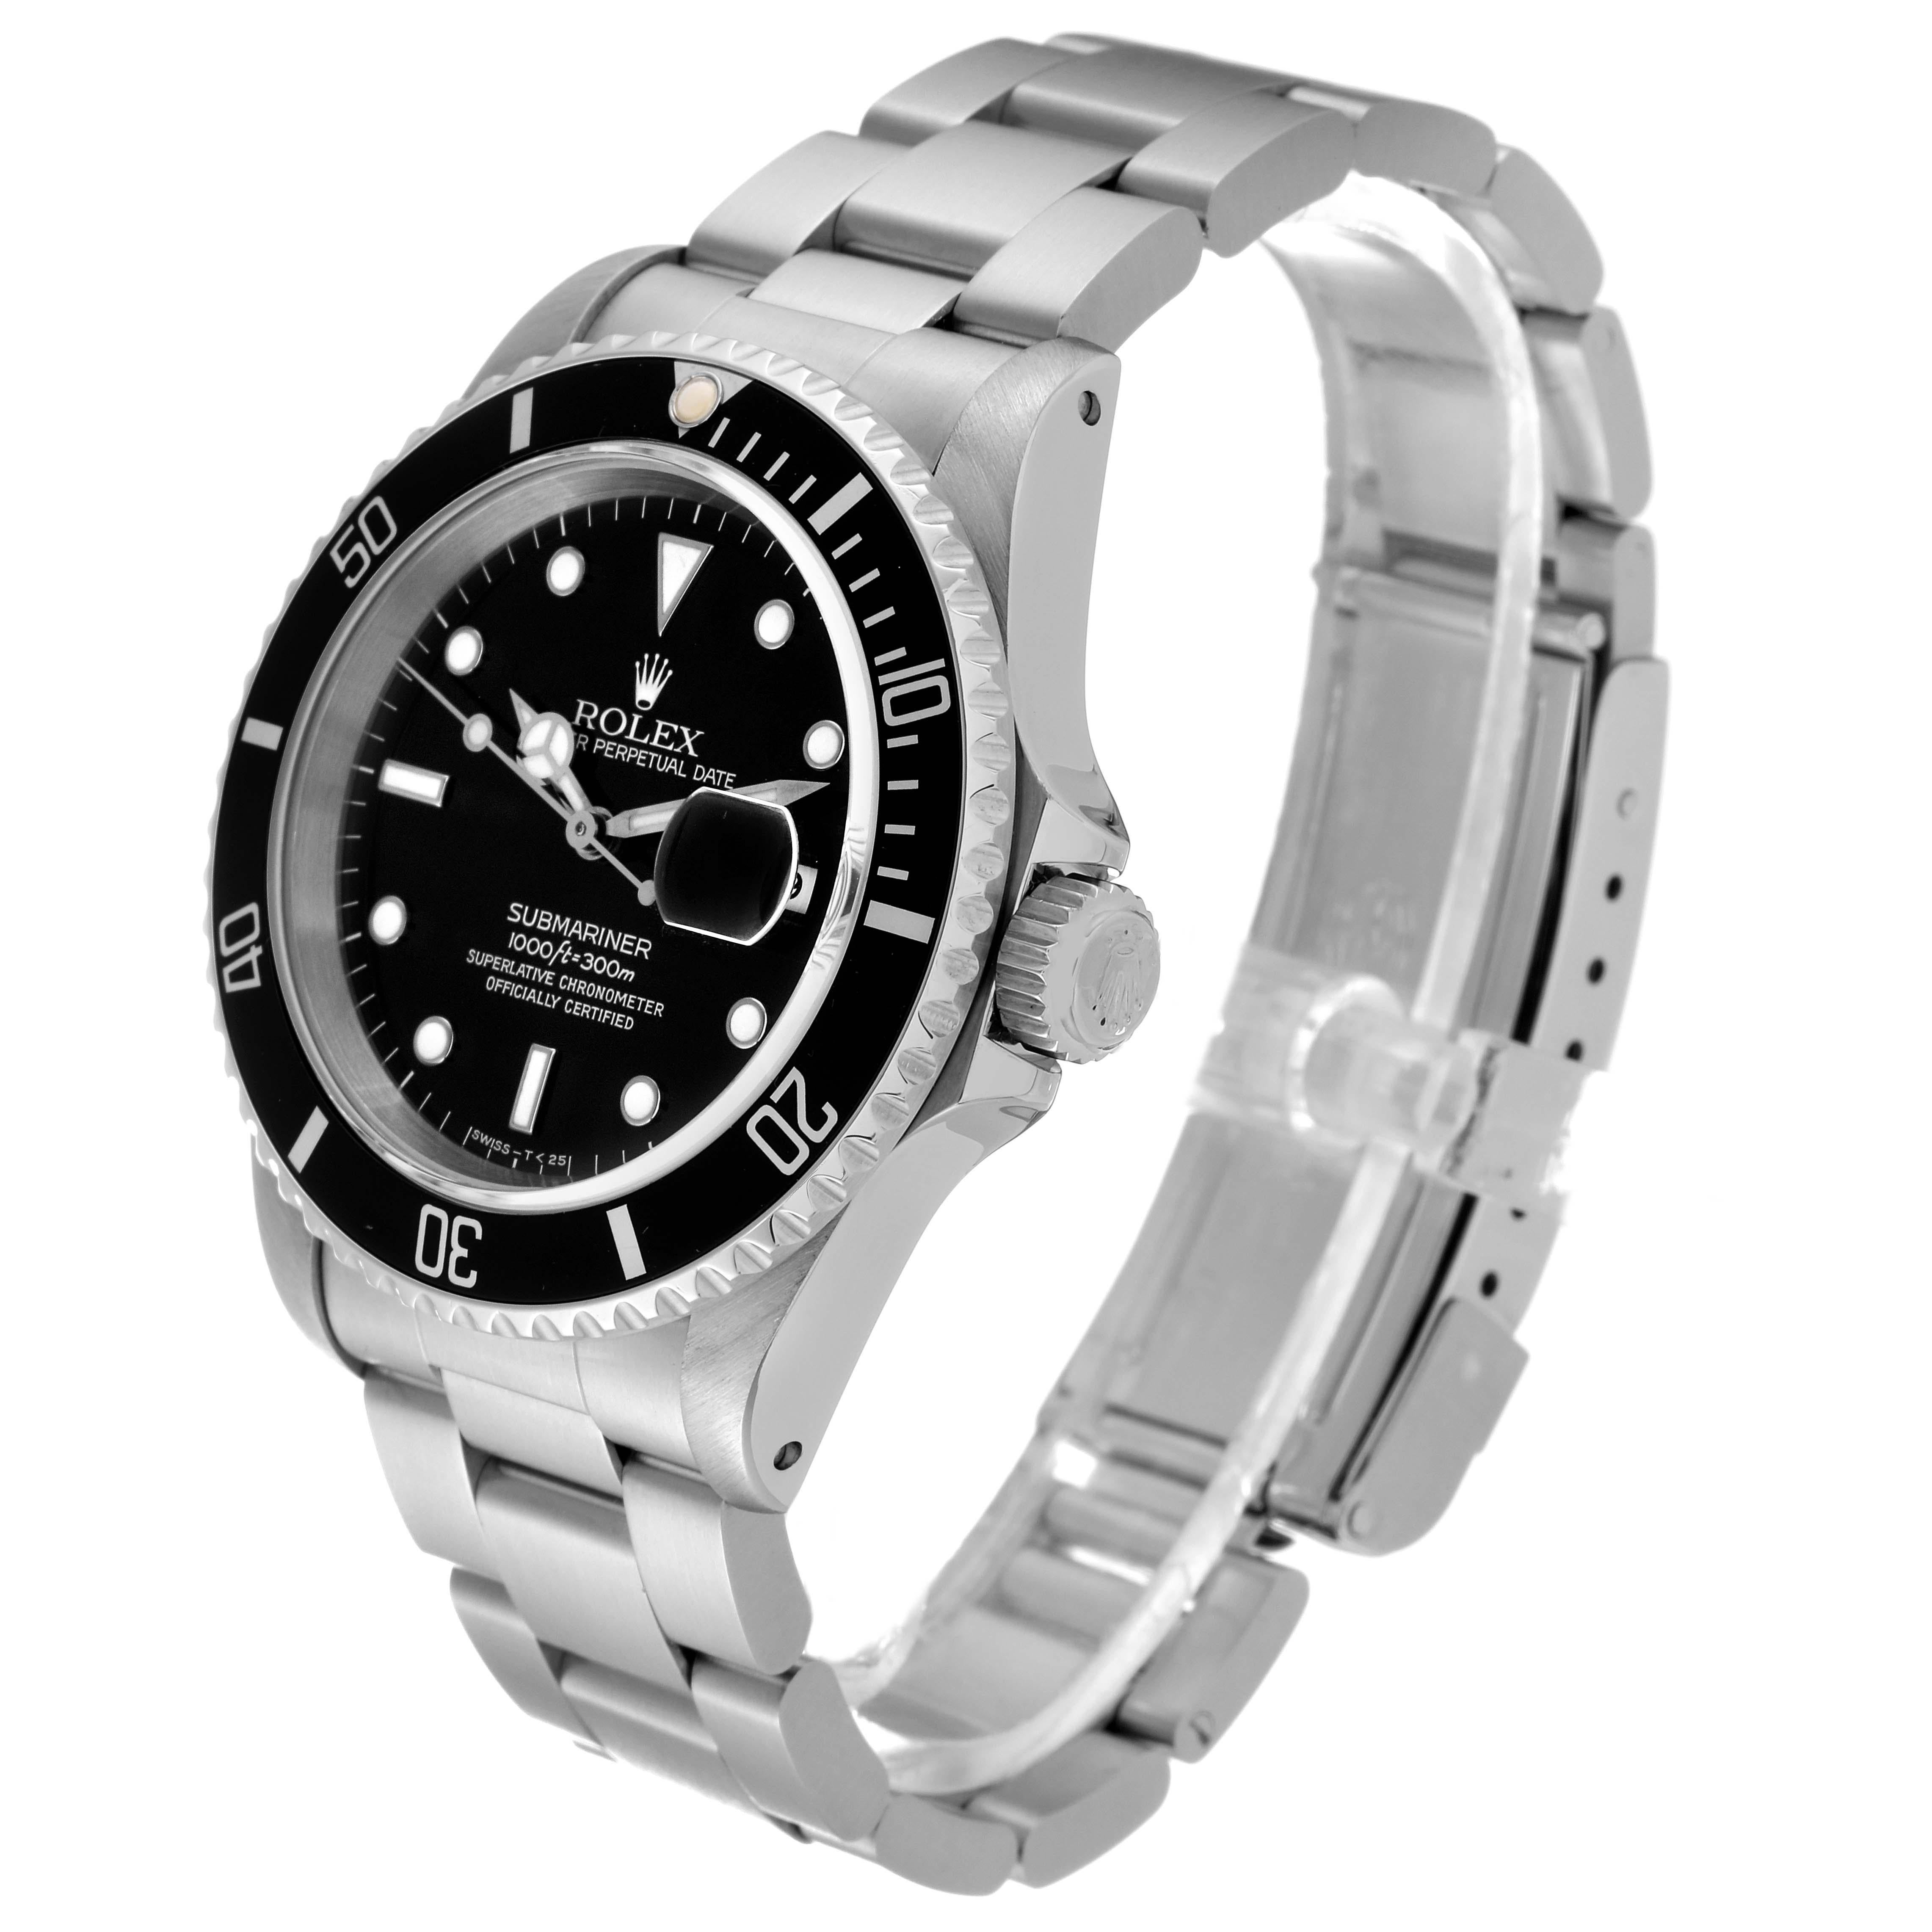 Rolex Submariner Date Black Frosted Dial Steel Mens Watch 16610 Box Papers For Sale 2